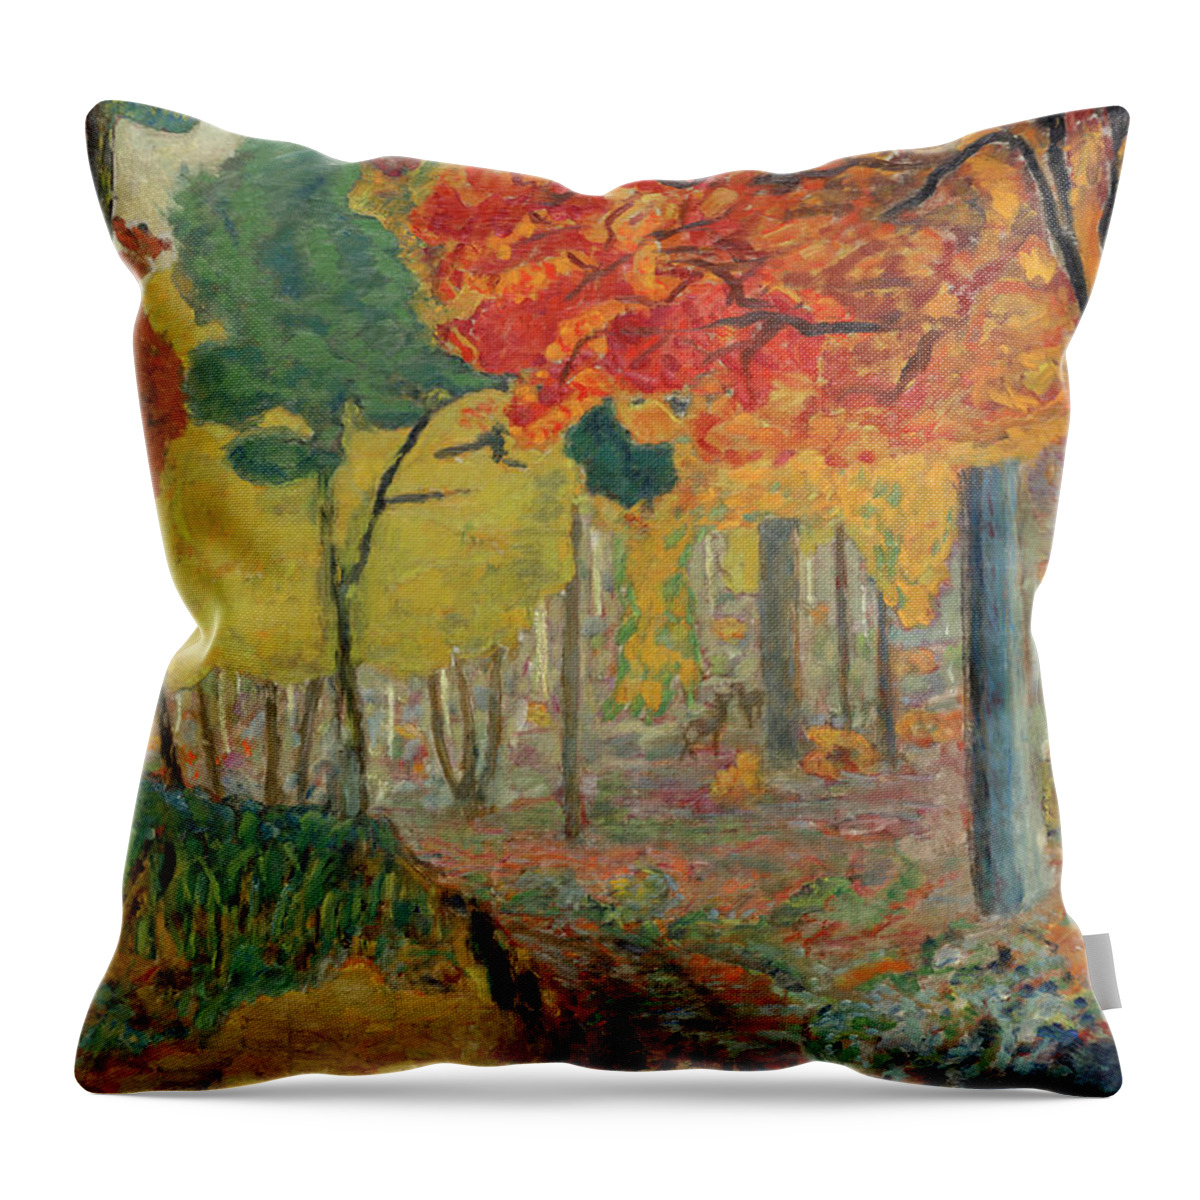 Pierre Bonnard Throw Pillow featuring the painting Deer in the Undergrowth by Pierre Bonnard